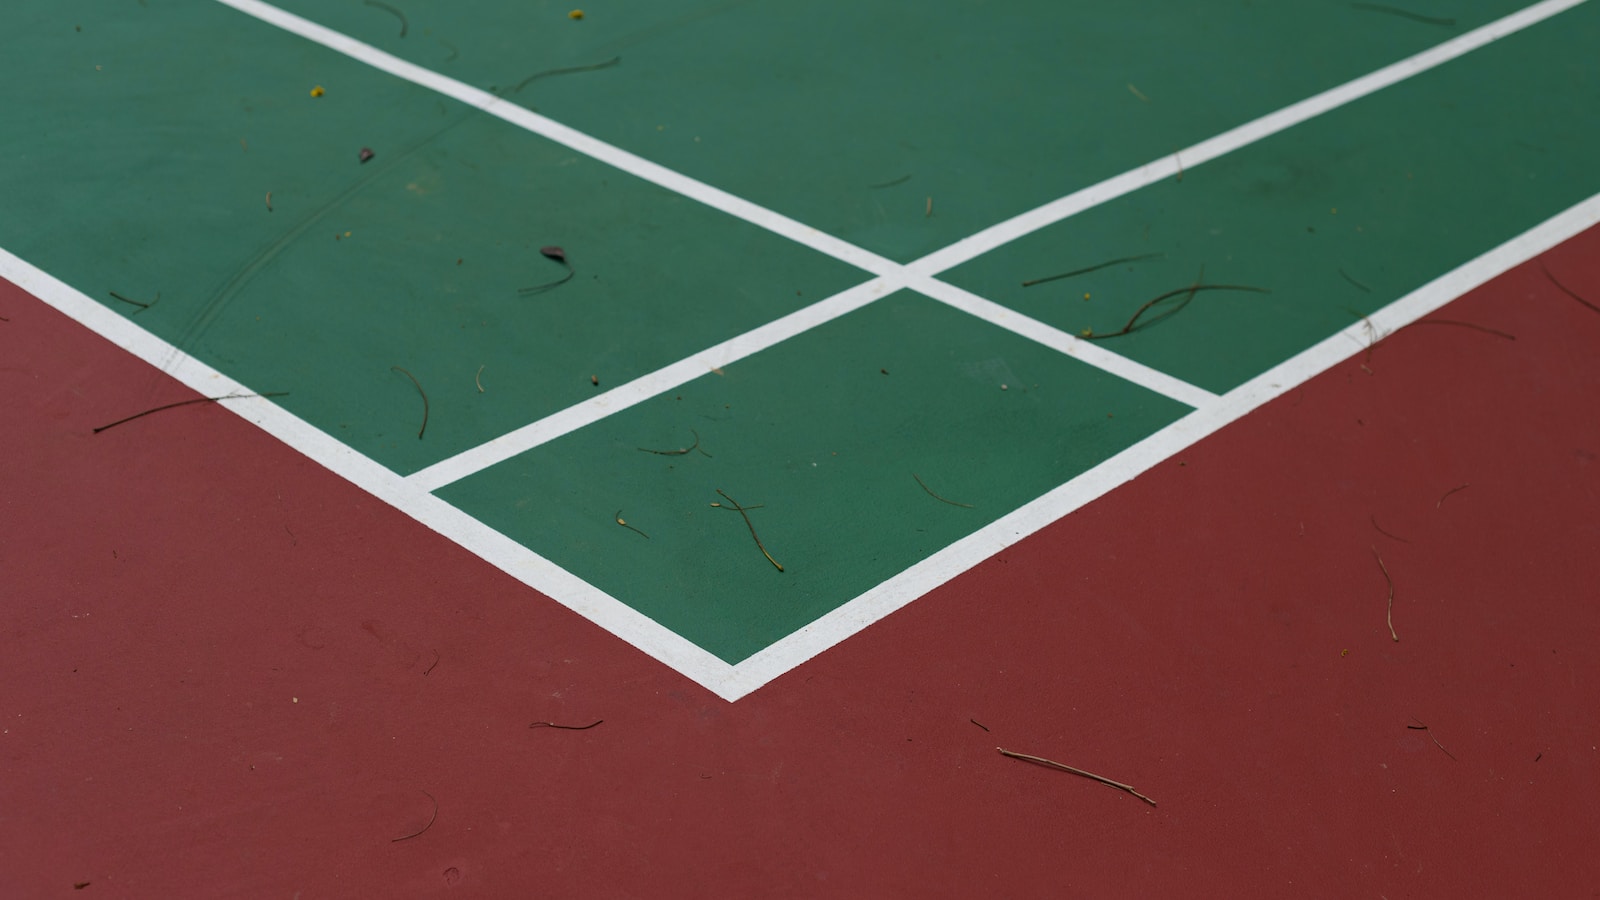 a tennis court with a red and green court